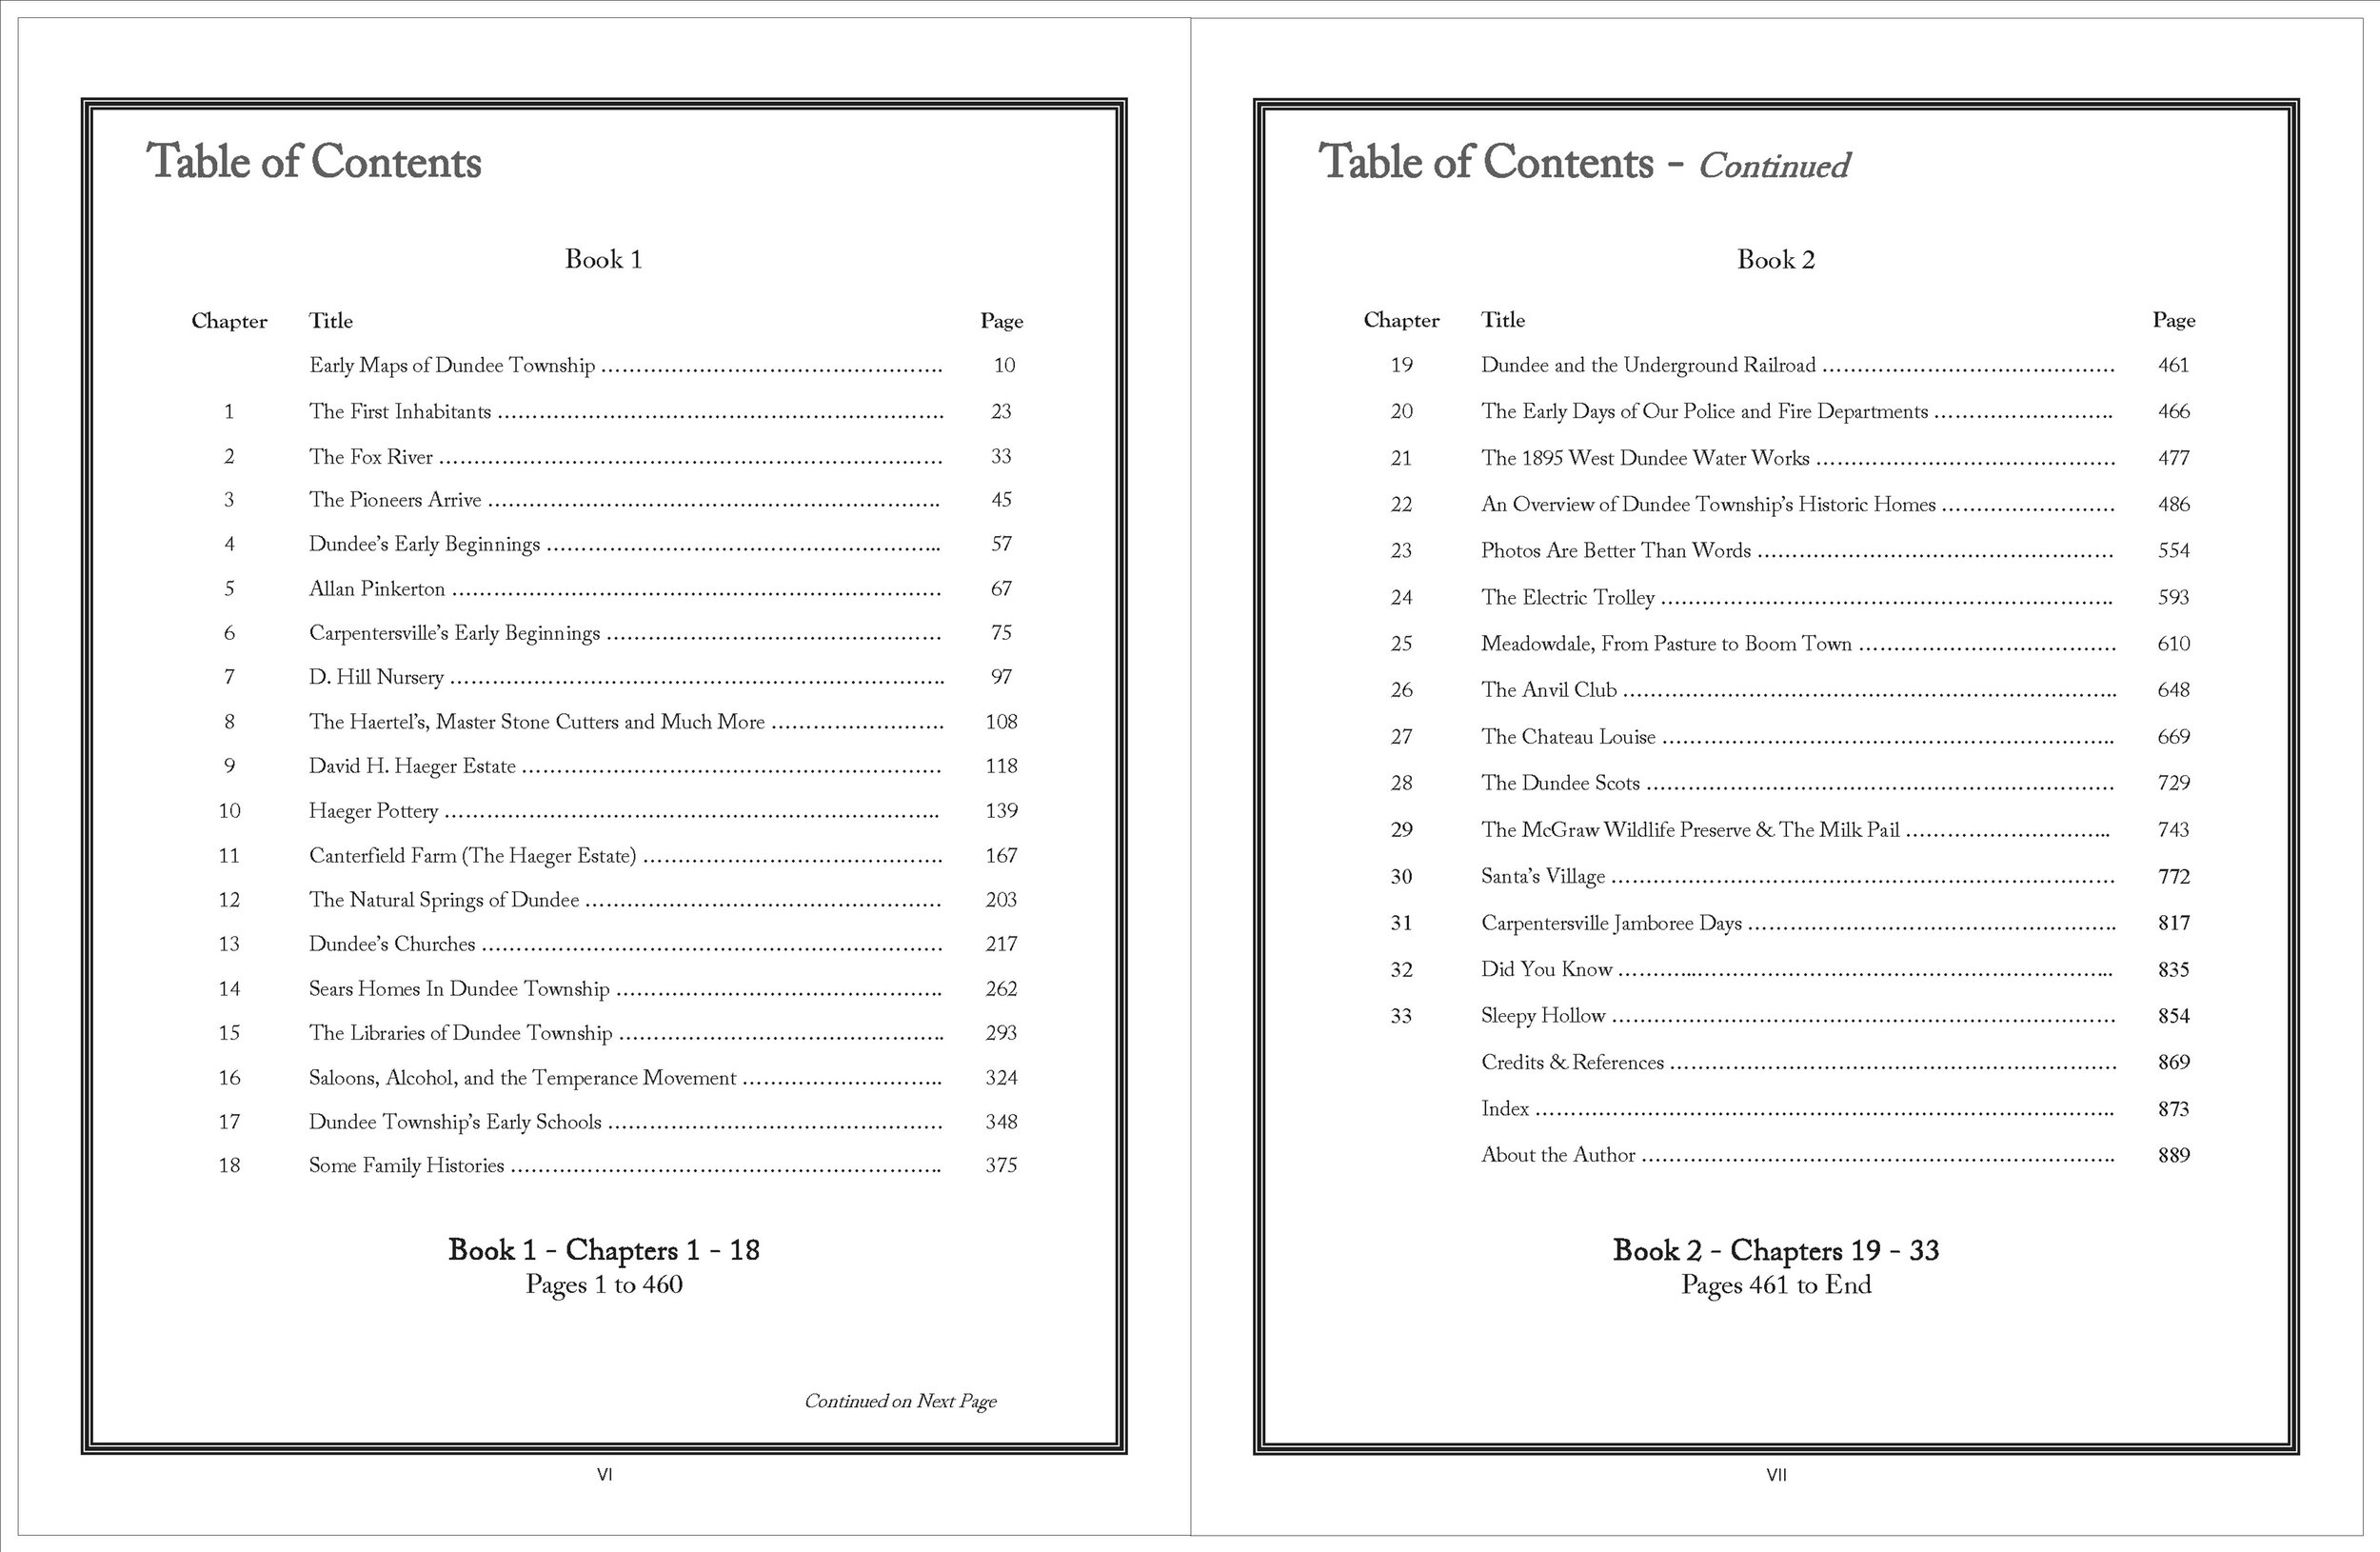 001 Table of Contents.jpg